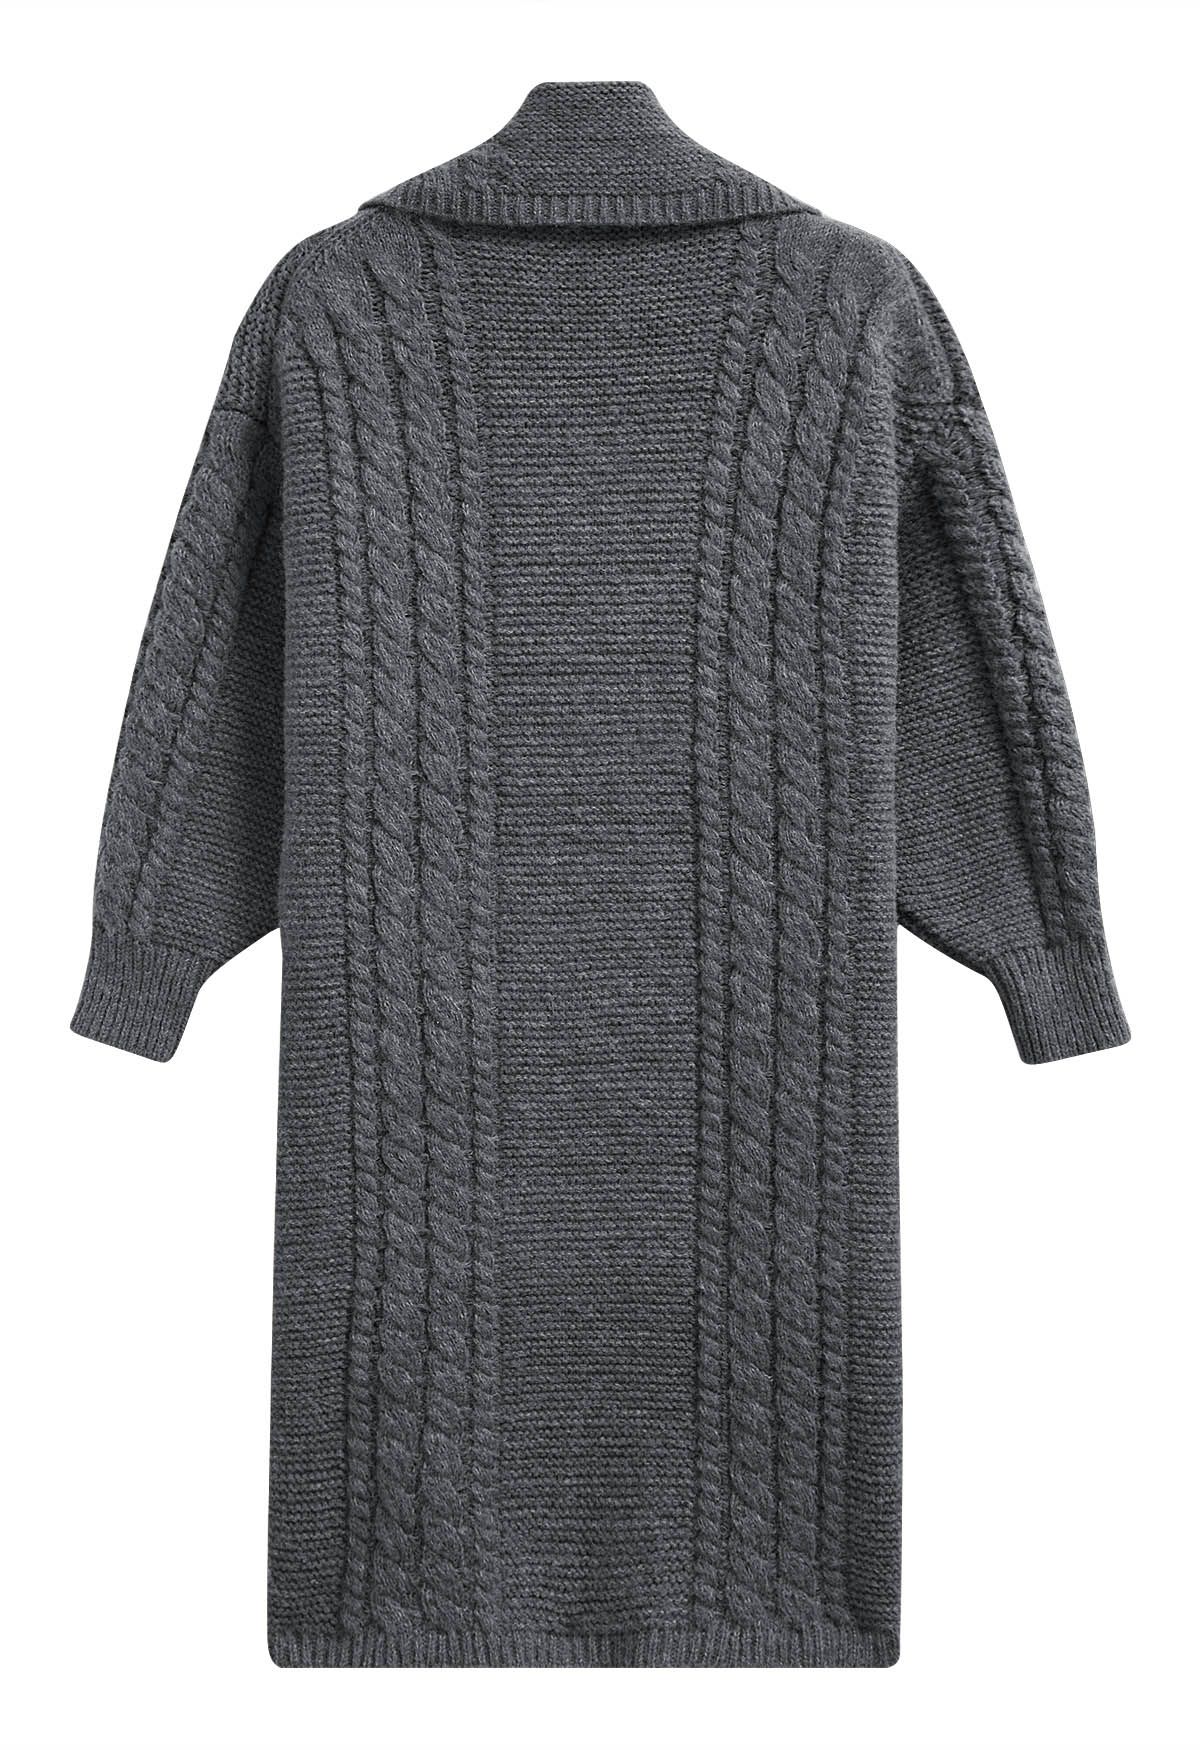 Flap Collar Cable Knit Longline Cardigan in Grey